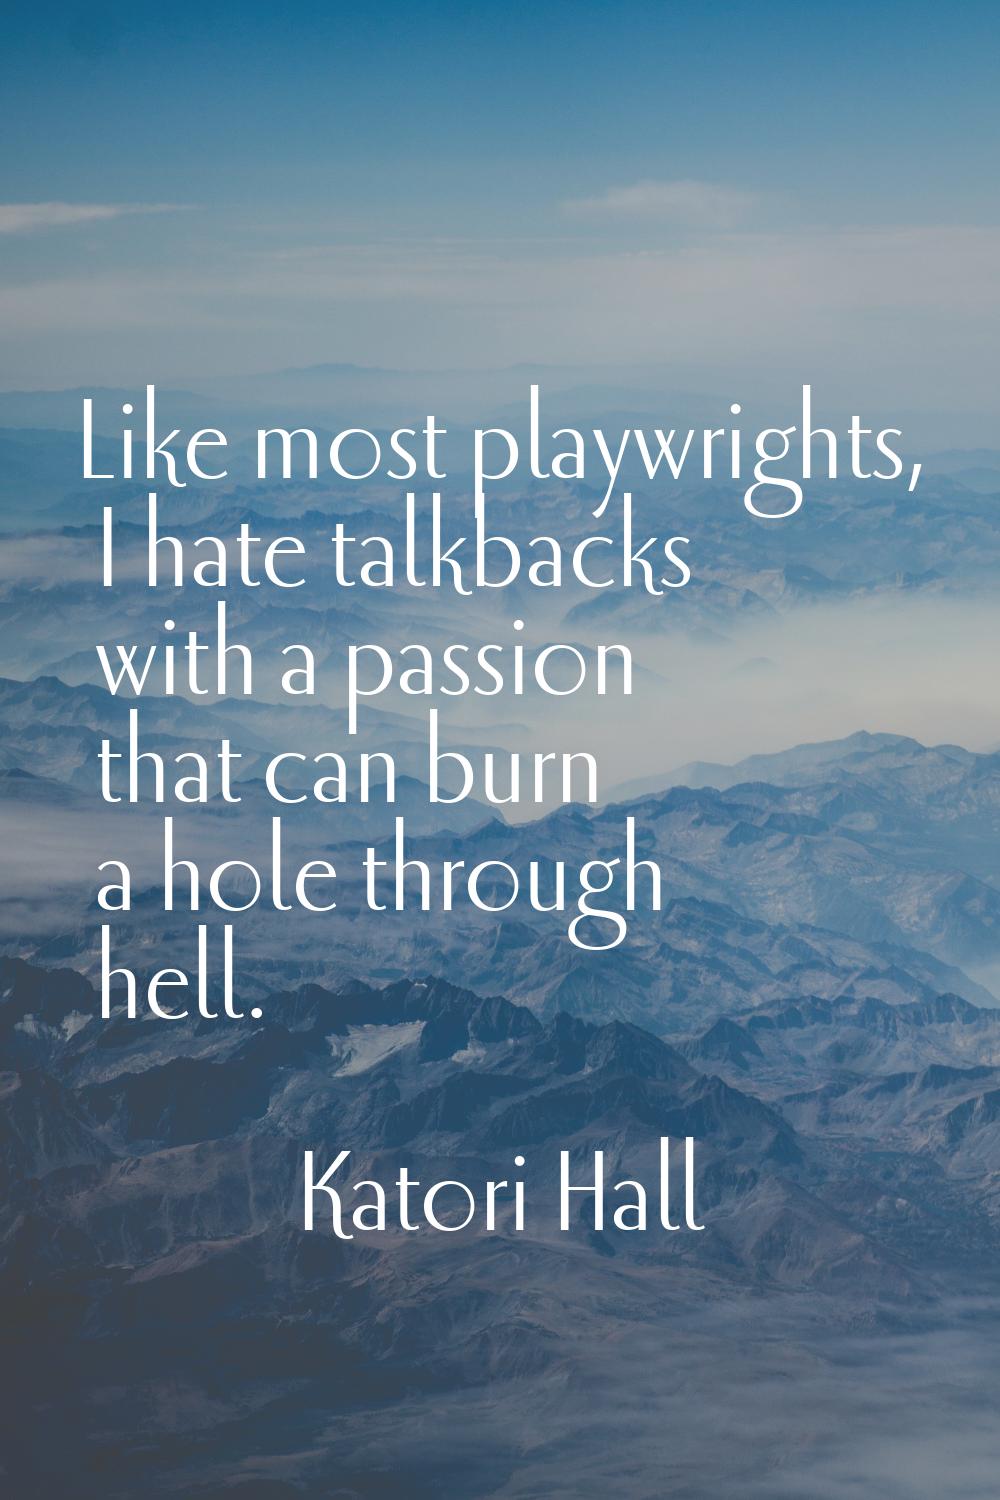 Like most playwrights, I hate talkbacks with a passion that can burn a hole through hell.